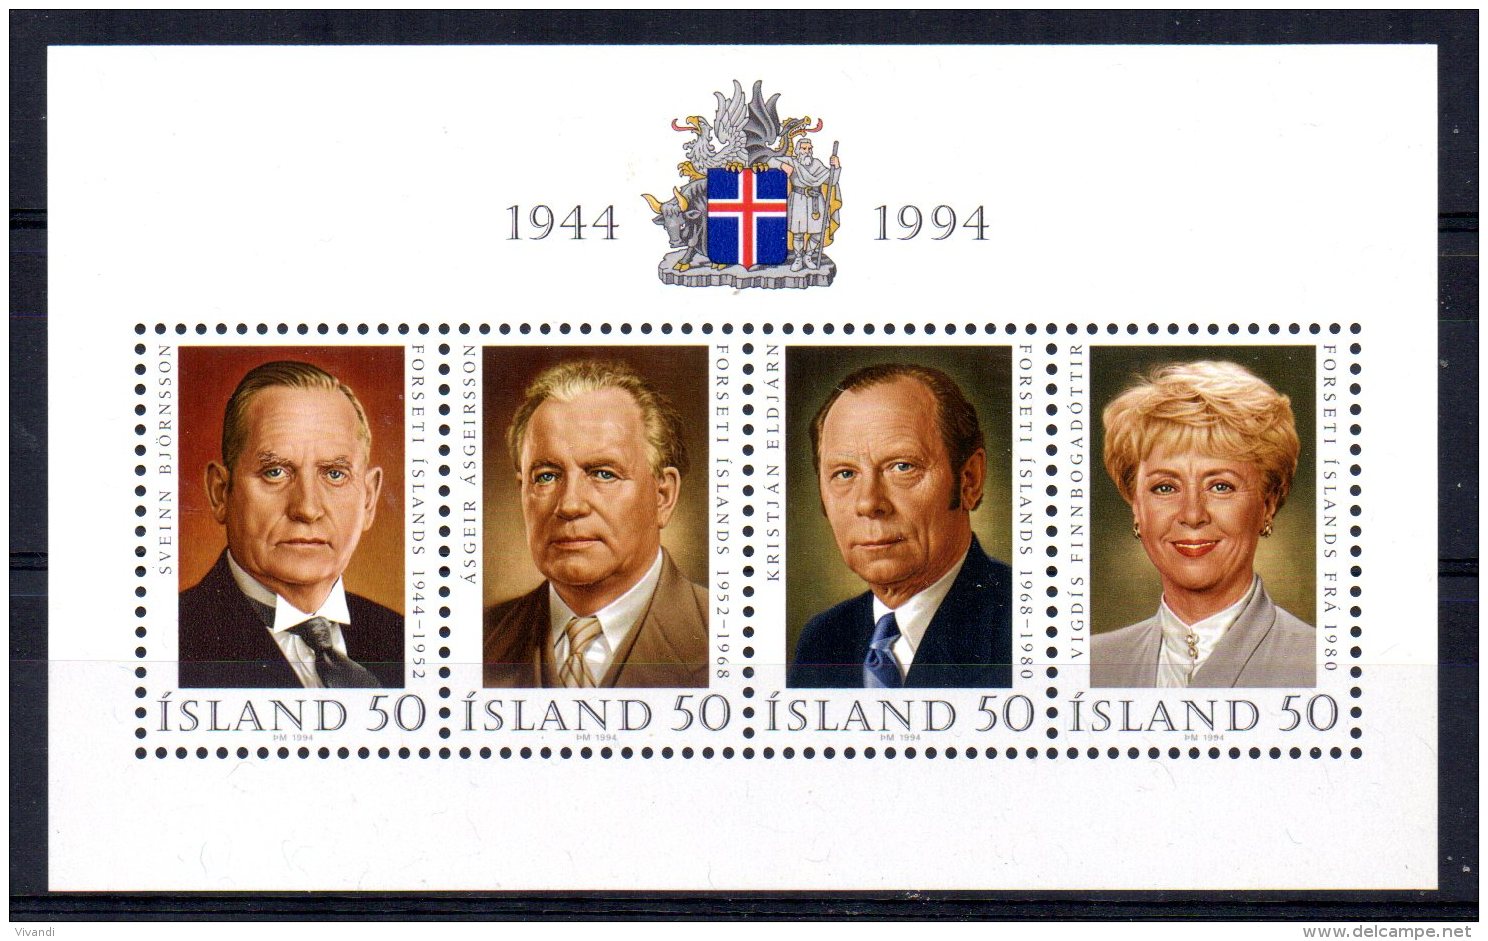 Iceland - 1996 - 50th Anniversary Of Republic/Presidents Miniature Sheet - MNH - Unused Stamps